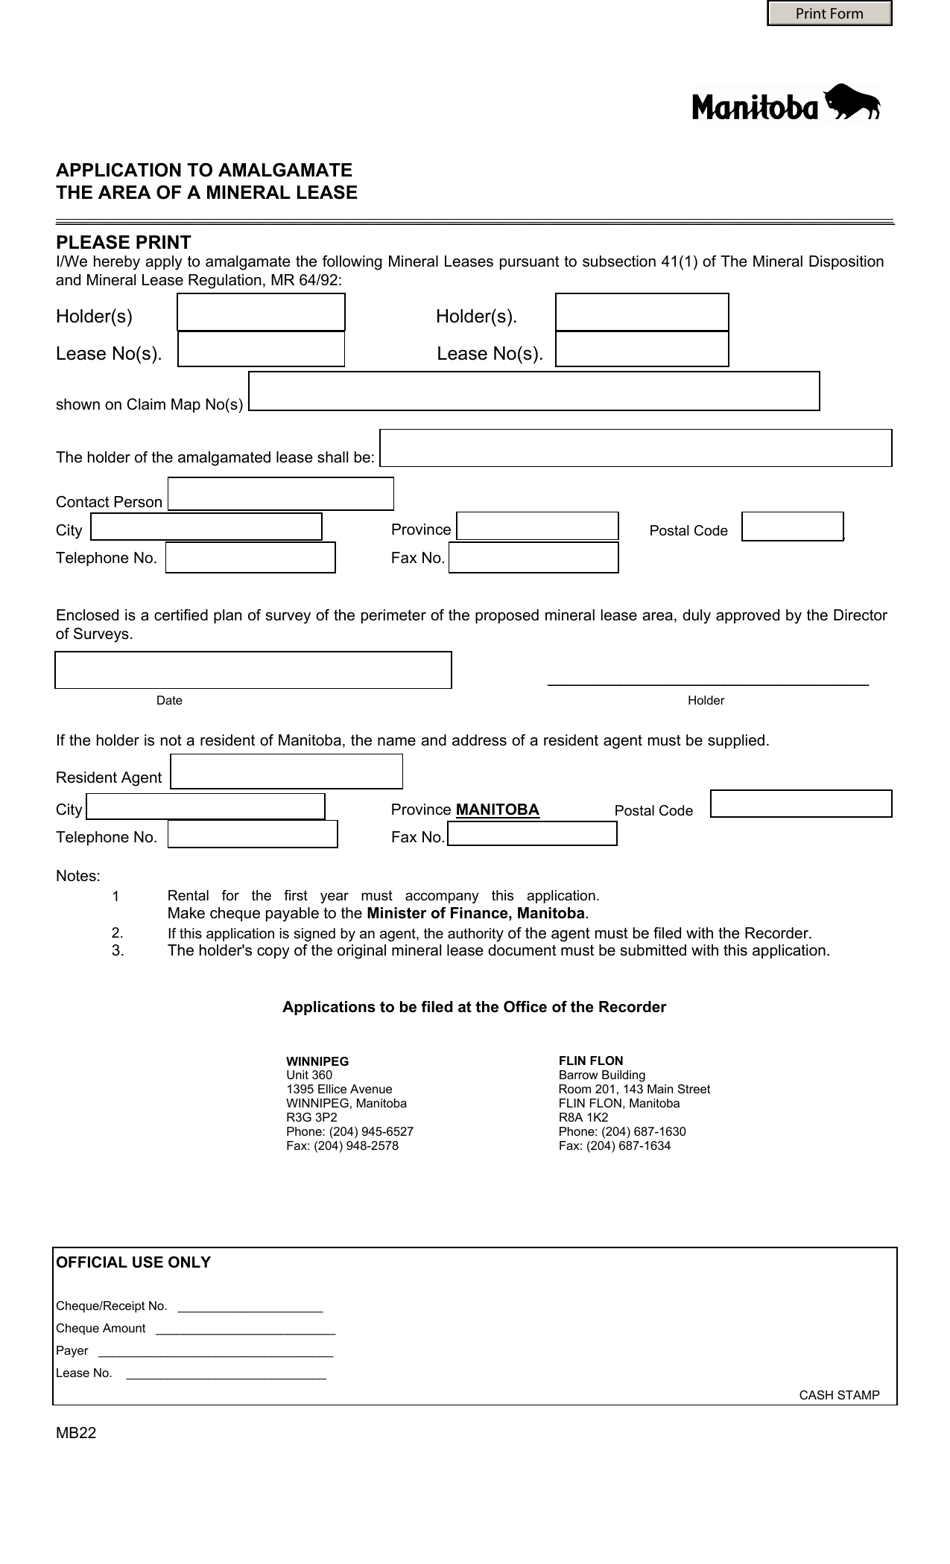 Form MB22 Application to Amalgamate the Area of a Mineral Lease - Manitoba, Canada, Page 1